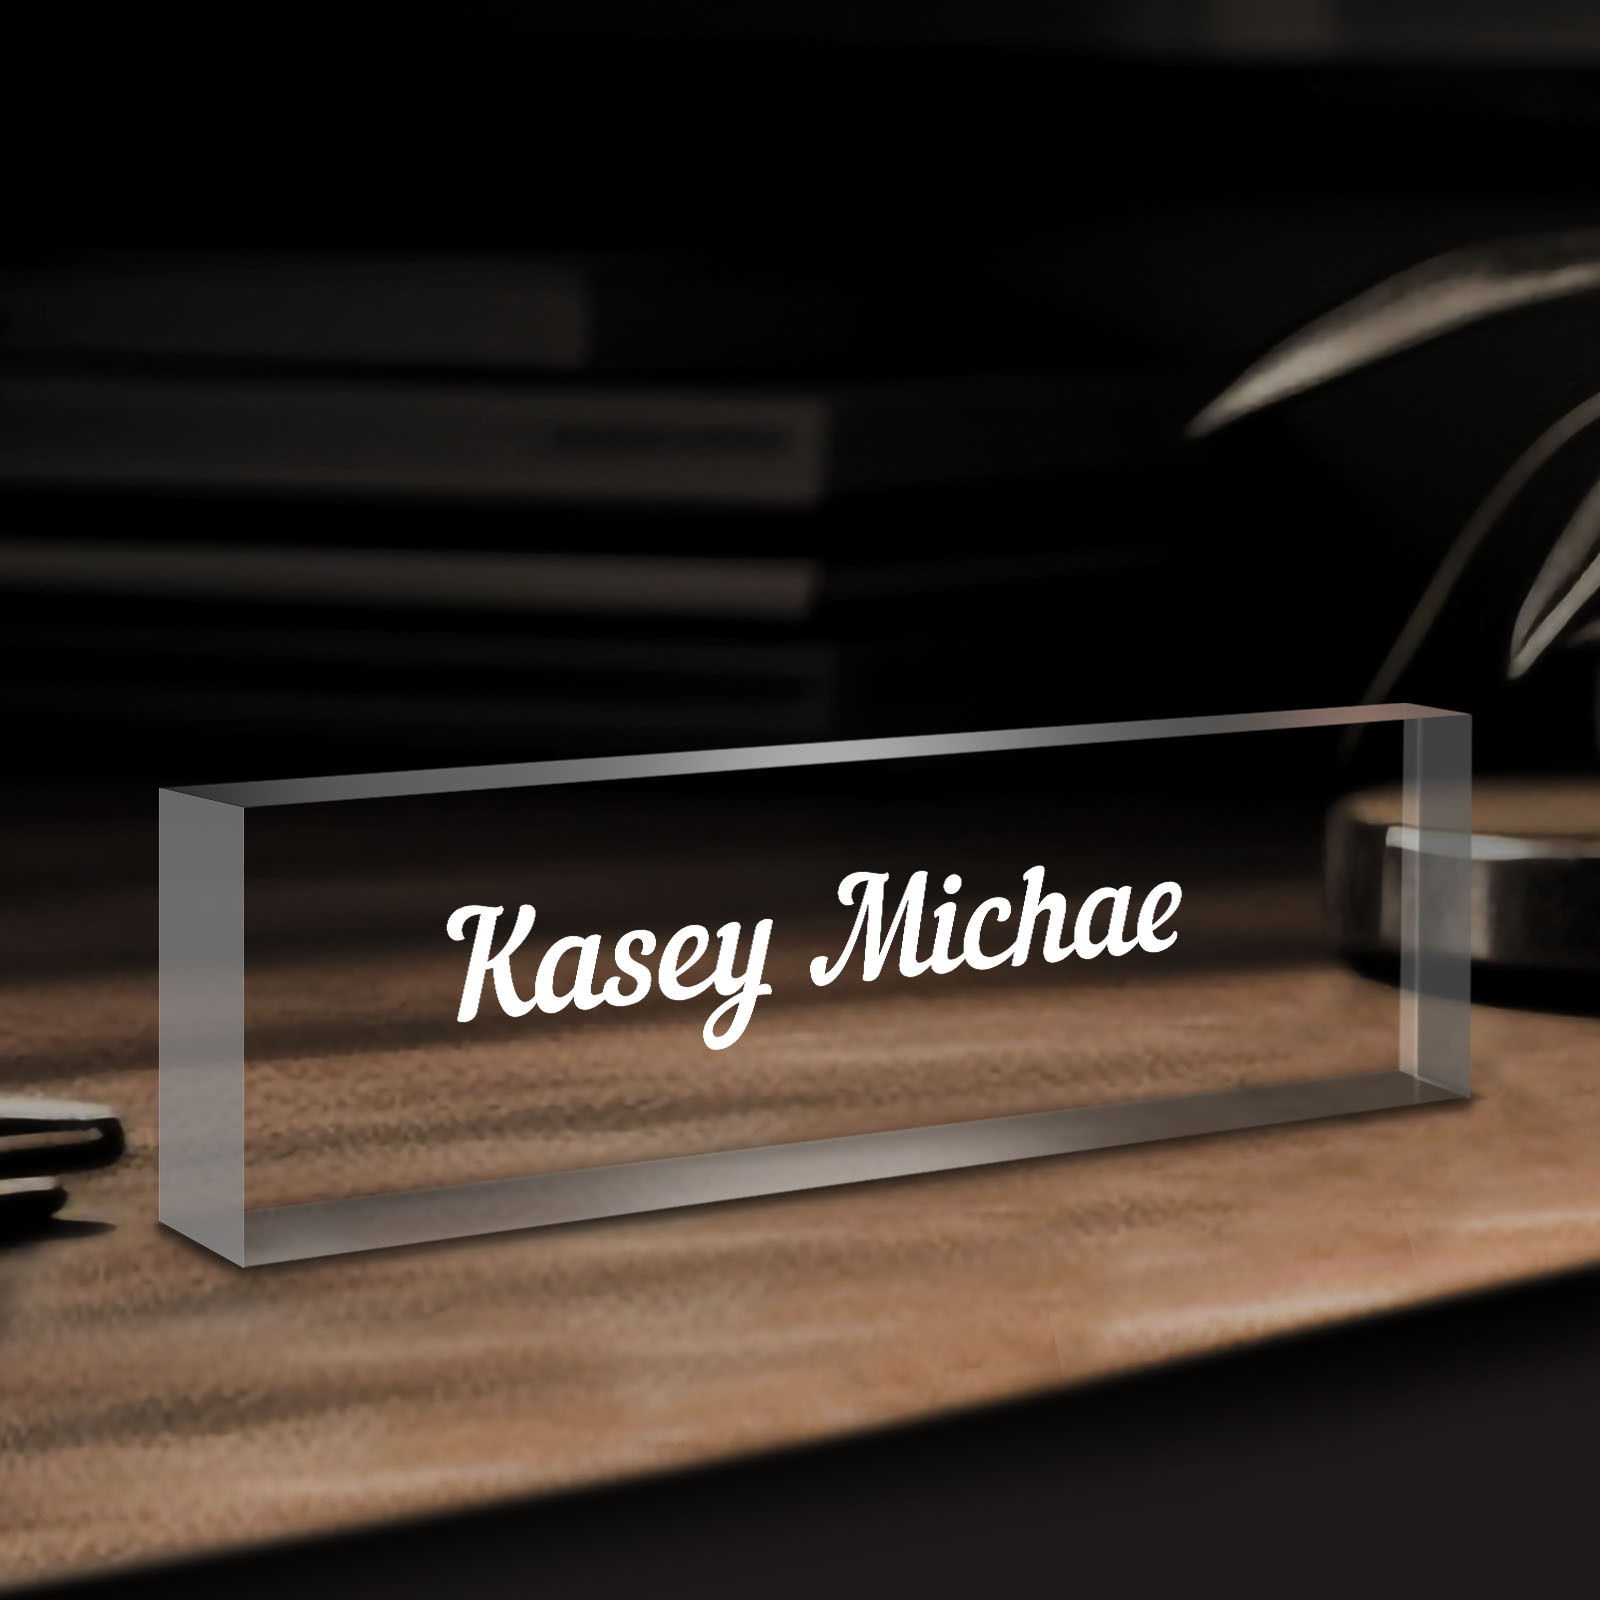 

1pc, Office Engraved Acrylic Name Plate For Desk Desk Name Plate Personalized| Custom Employee Appreciation Gifts Office Gifts For Women, Boss, Employee, Teacher, Manager Gifts For Employees